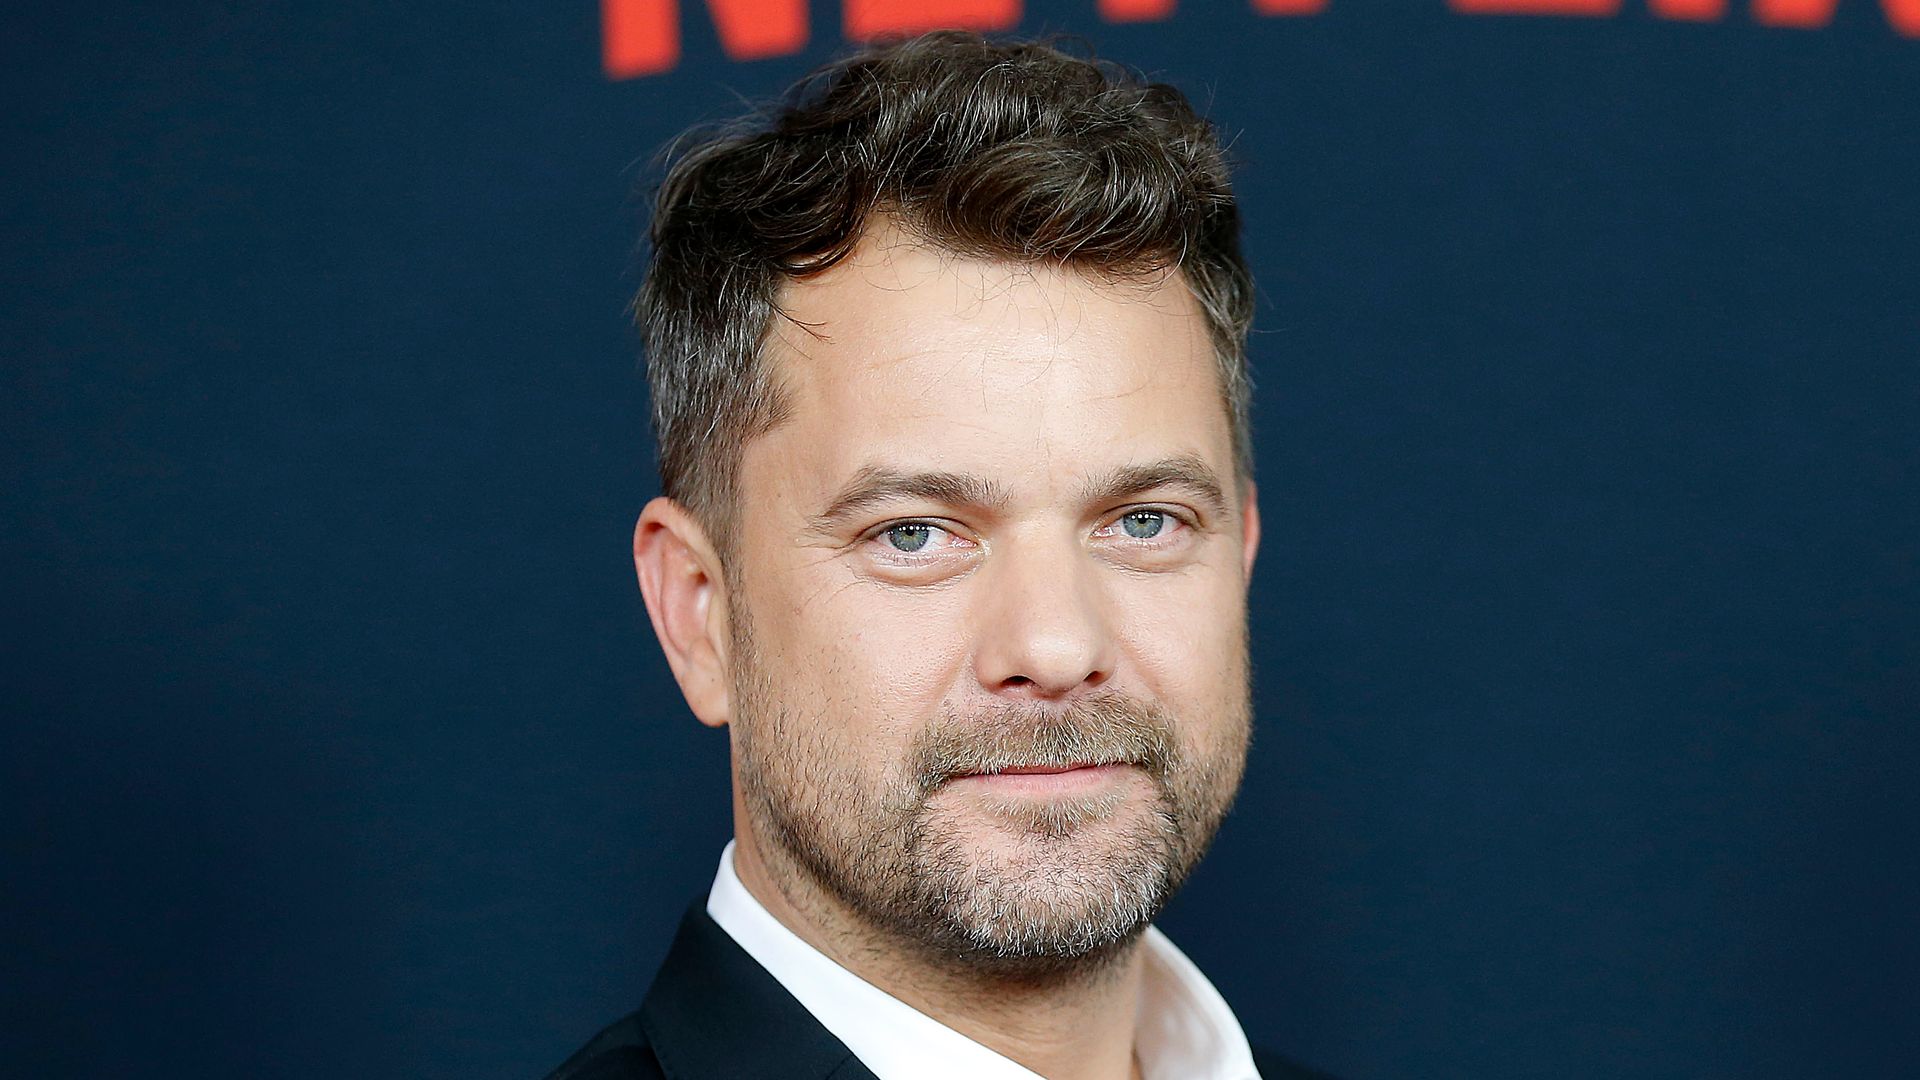 Joshua Jackson in suit at premiere 